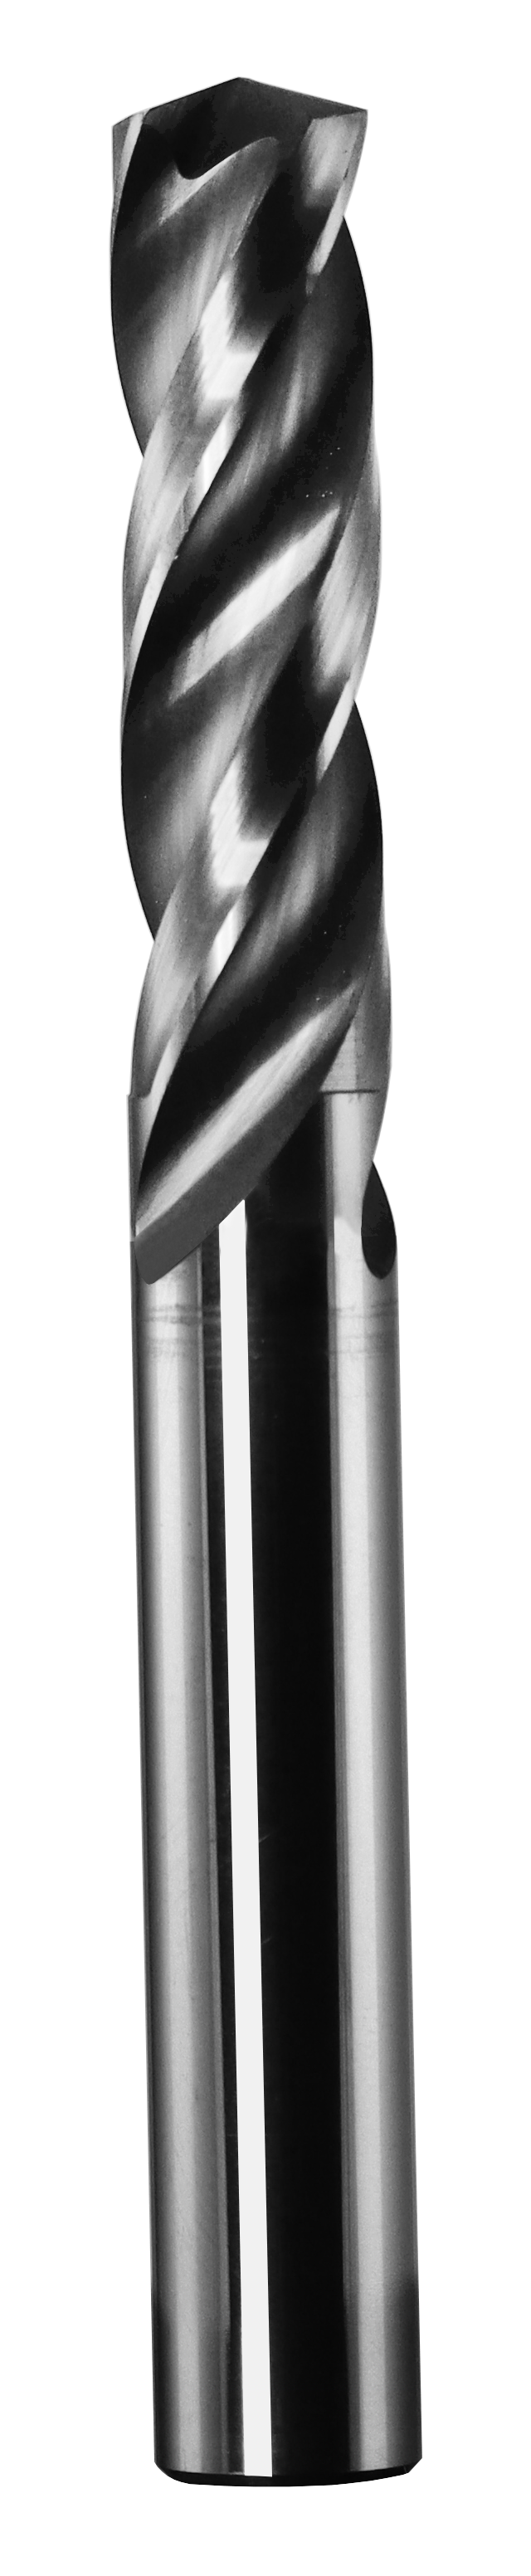 8.00mm Dia, 150 Degree Point, Solid Carbide Drill - 63017